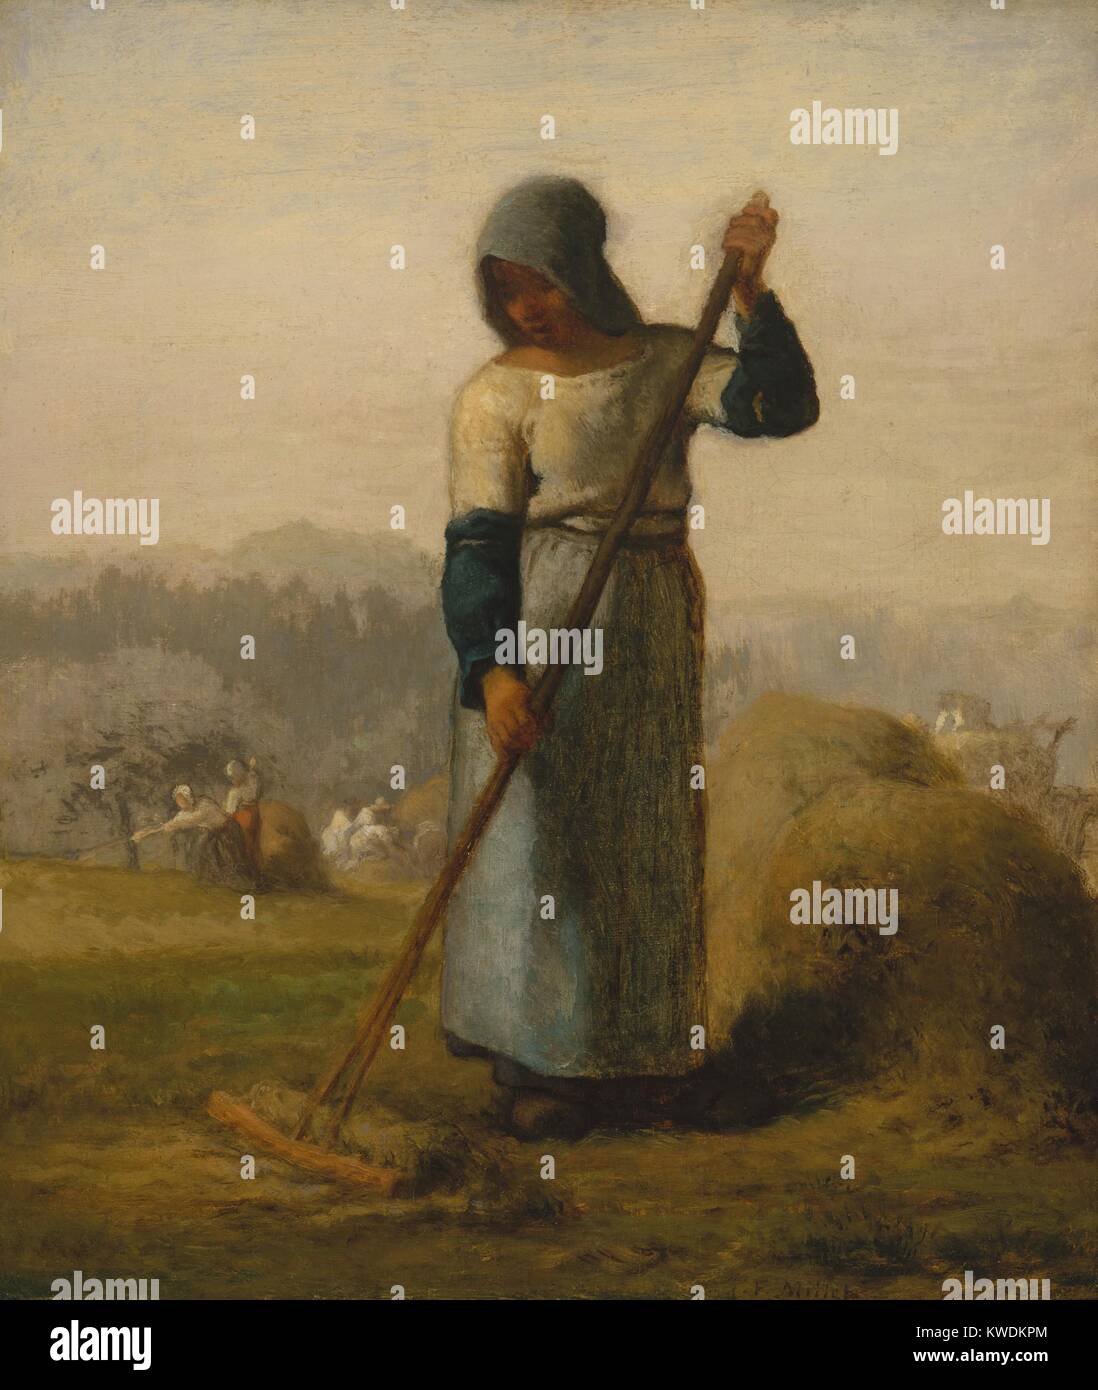 WOMAN WITH A RAKE, by Jean-Francois Millet, 1856-57, French painting, oil on canvas. After 20 years as portrait painter, Millet emerged as a pioneering realist in the later 1840s. This work was painted from one of his woodcut series Labors of the Fields. Millet was a member of the Romantic realist Barbizon School (BSLOC 2017 9 110) Stock Photo